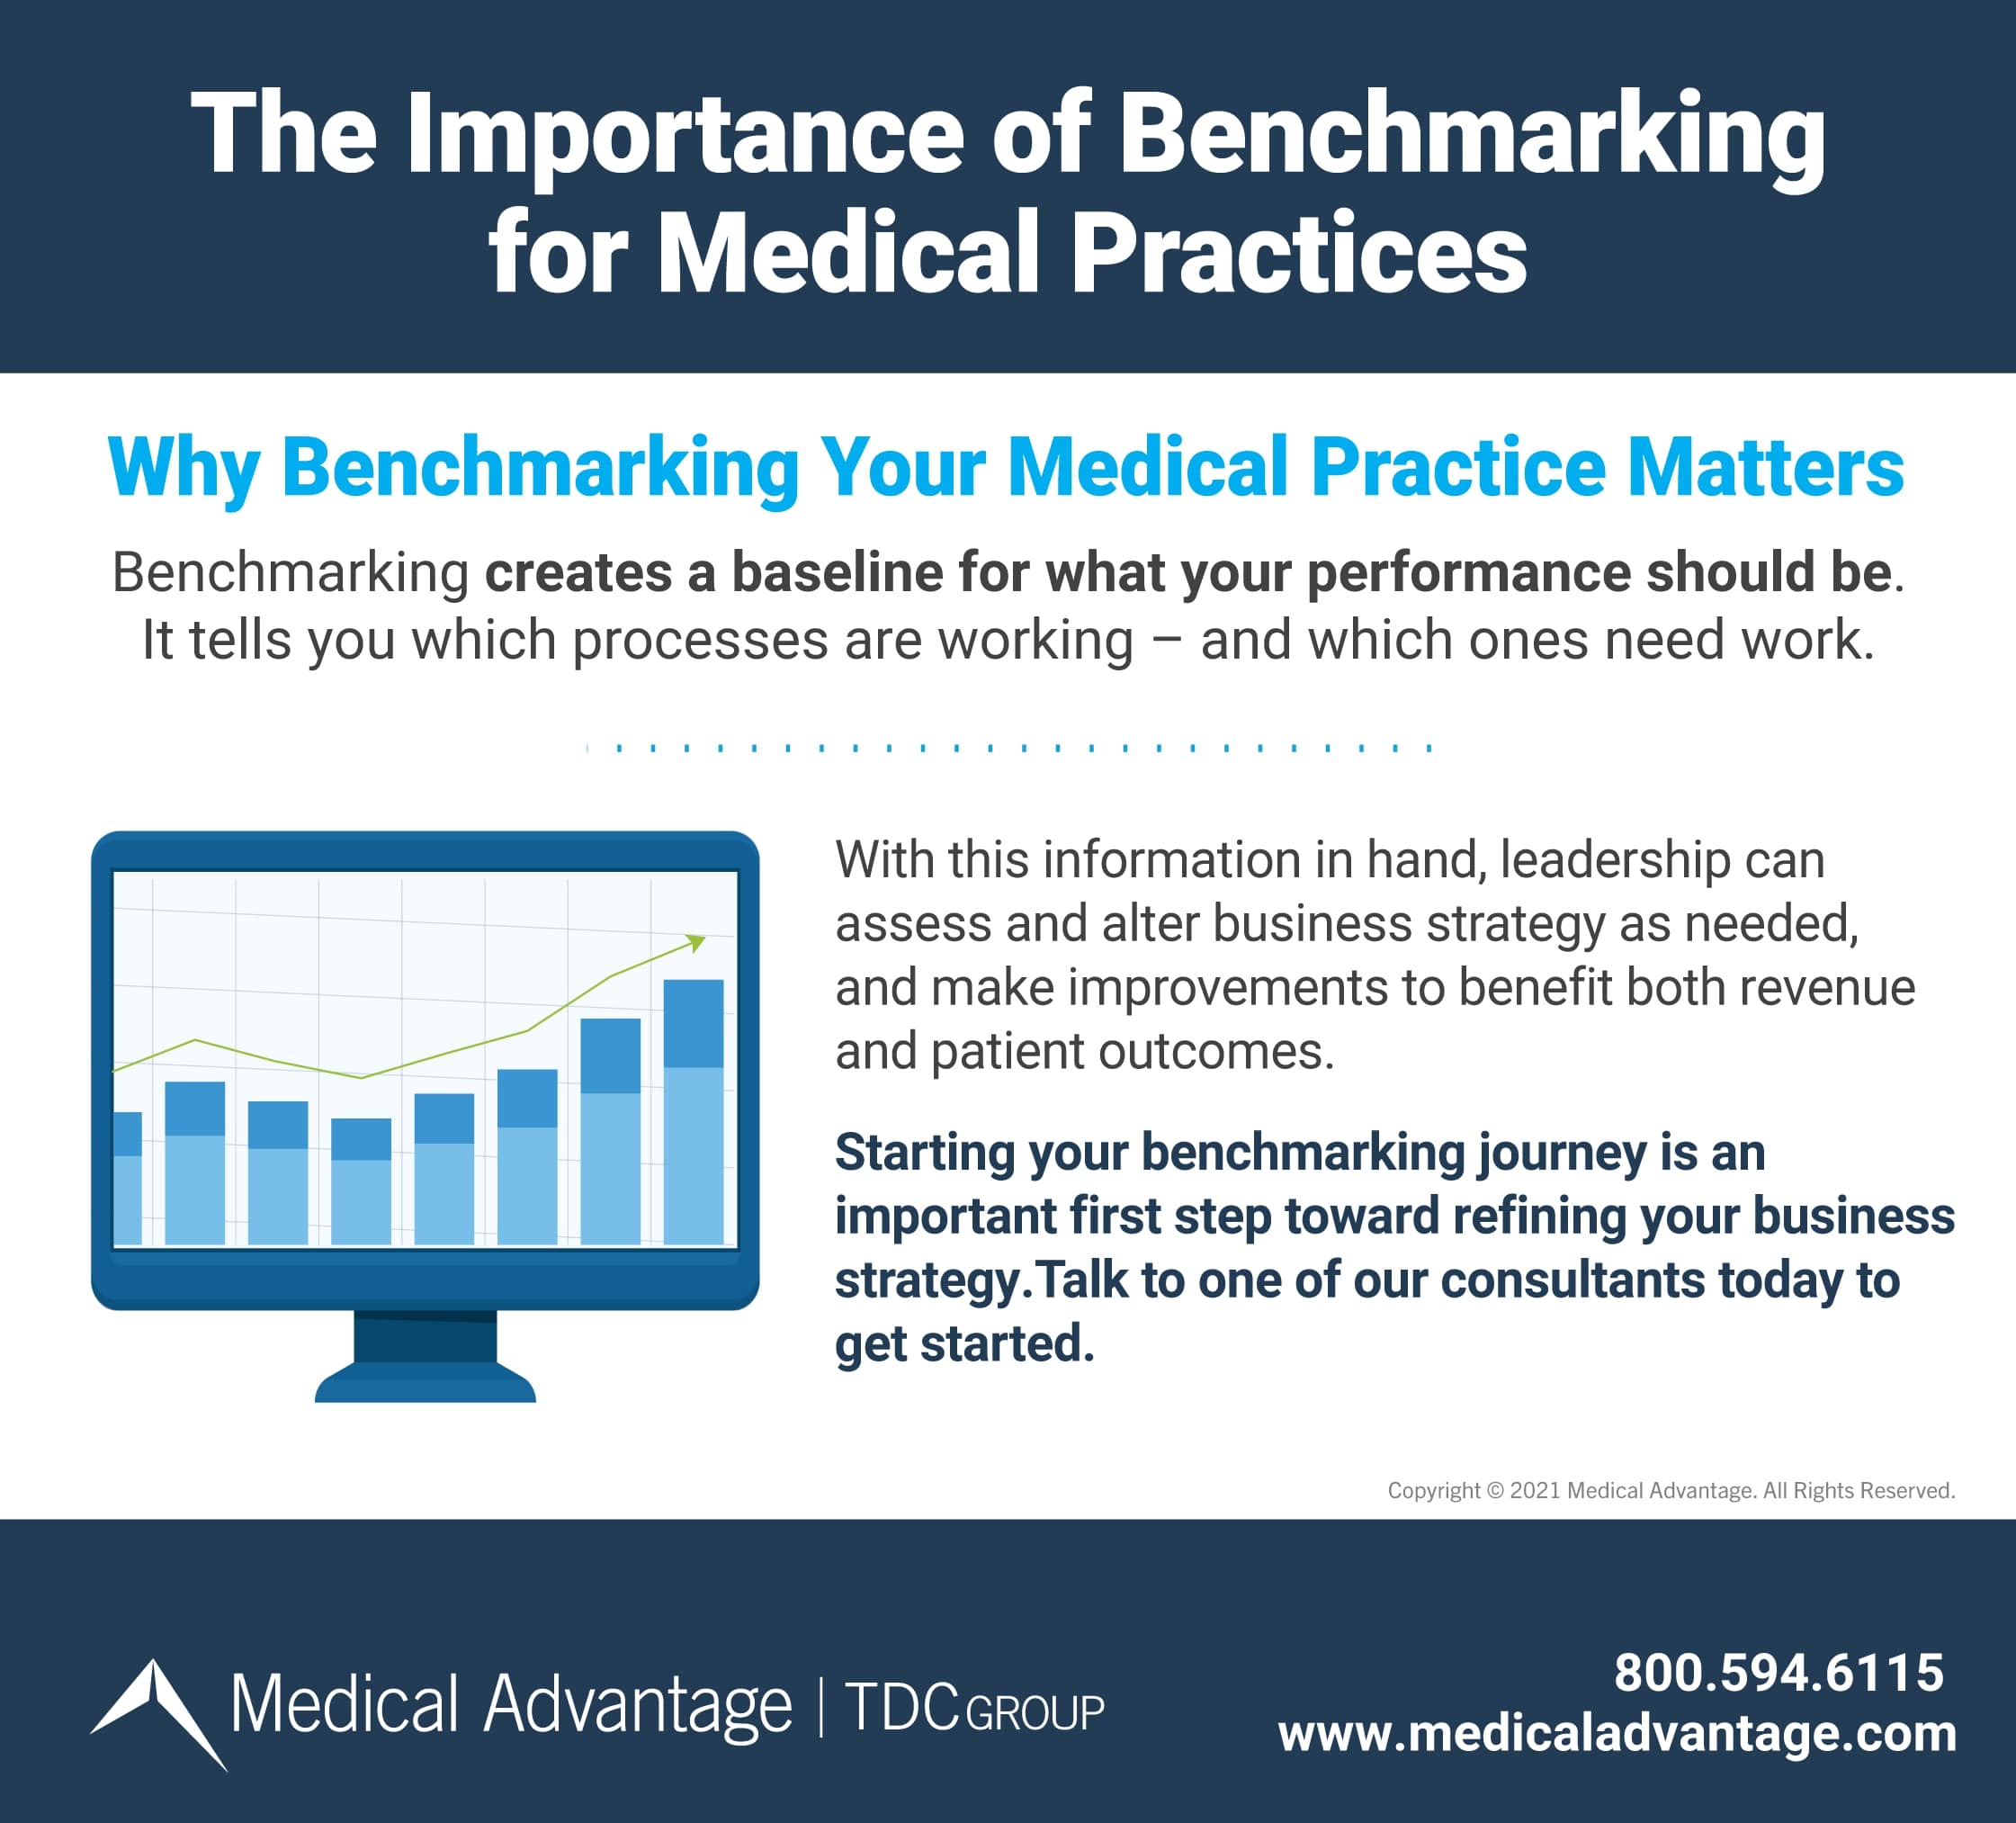 The Importance of Benchmarking for Medical Practices